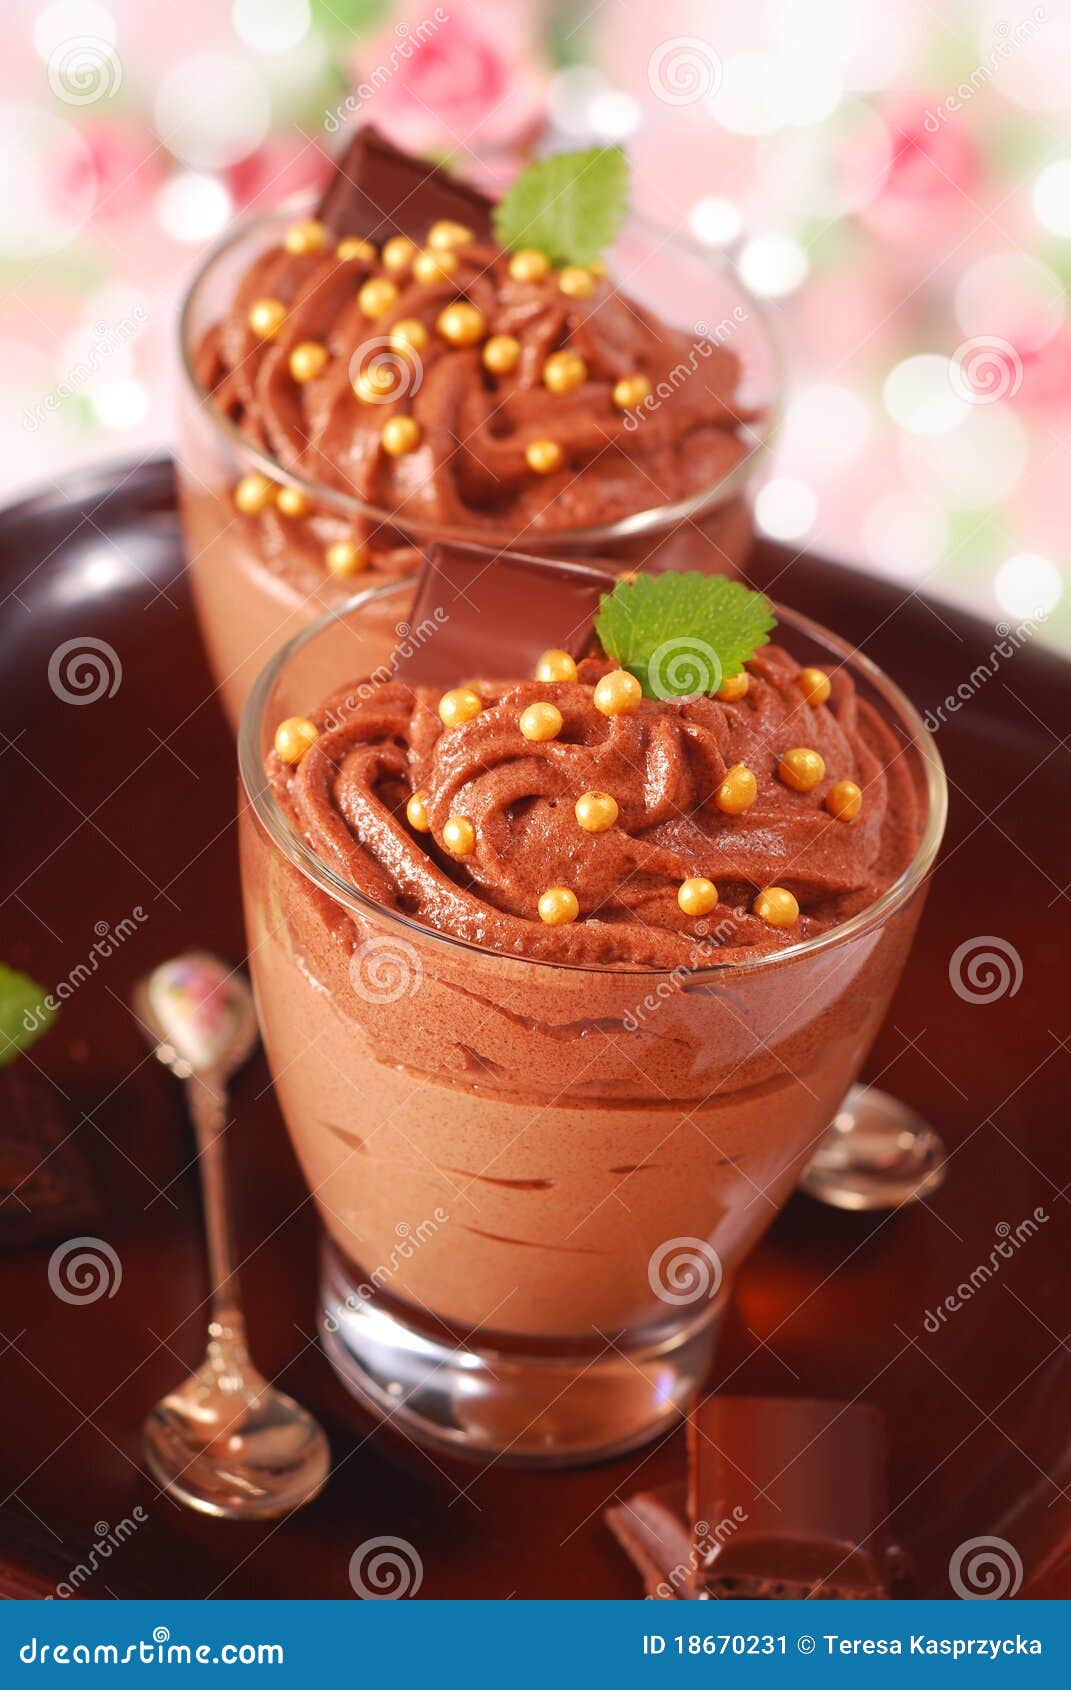 chocolate and nougat mousse